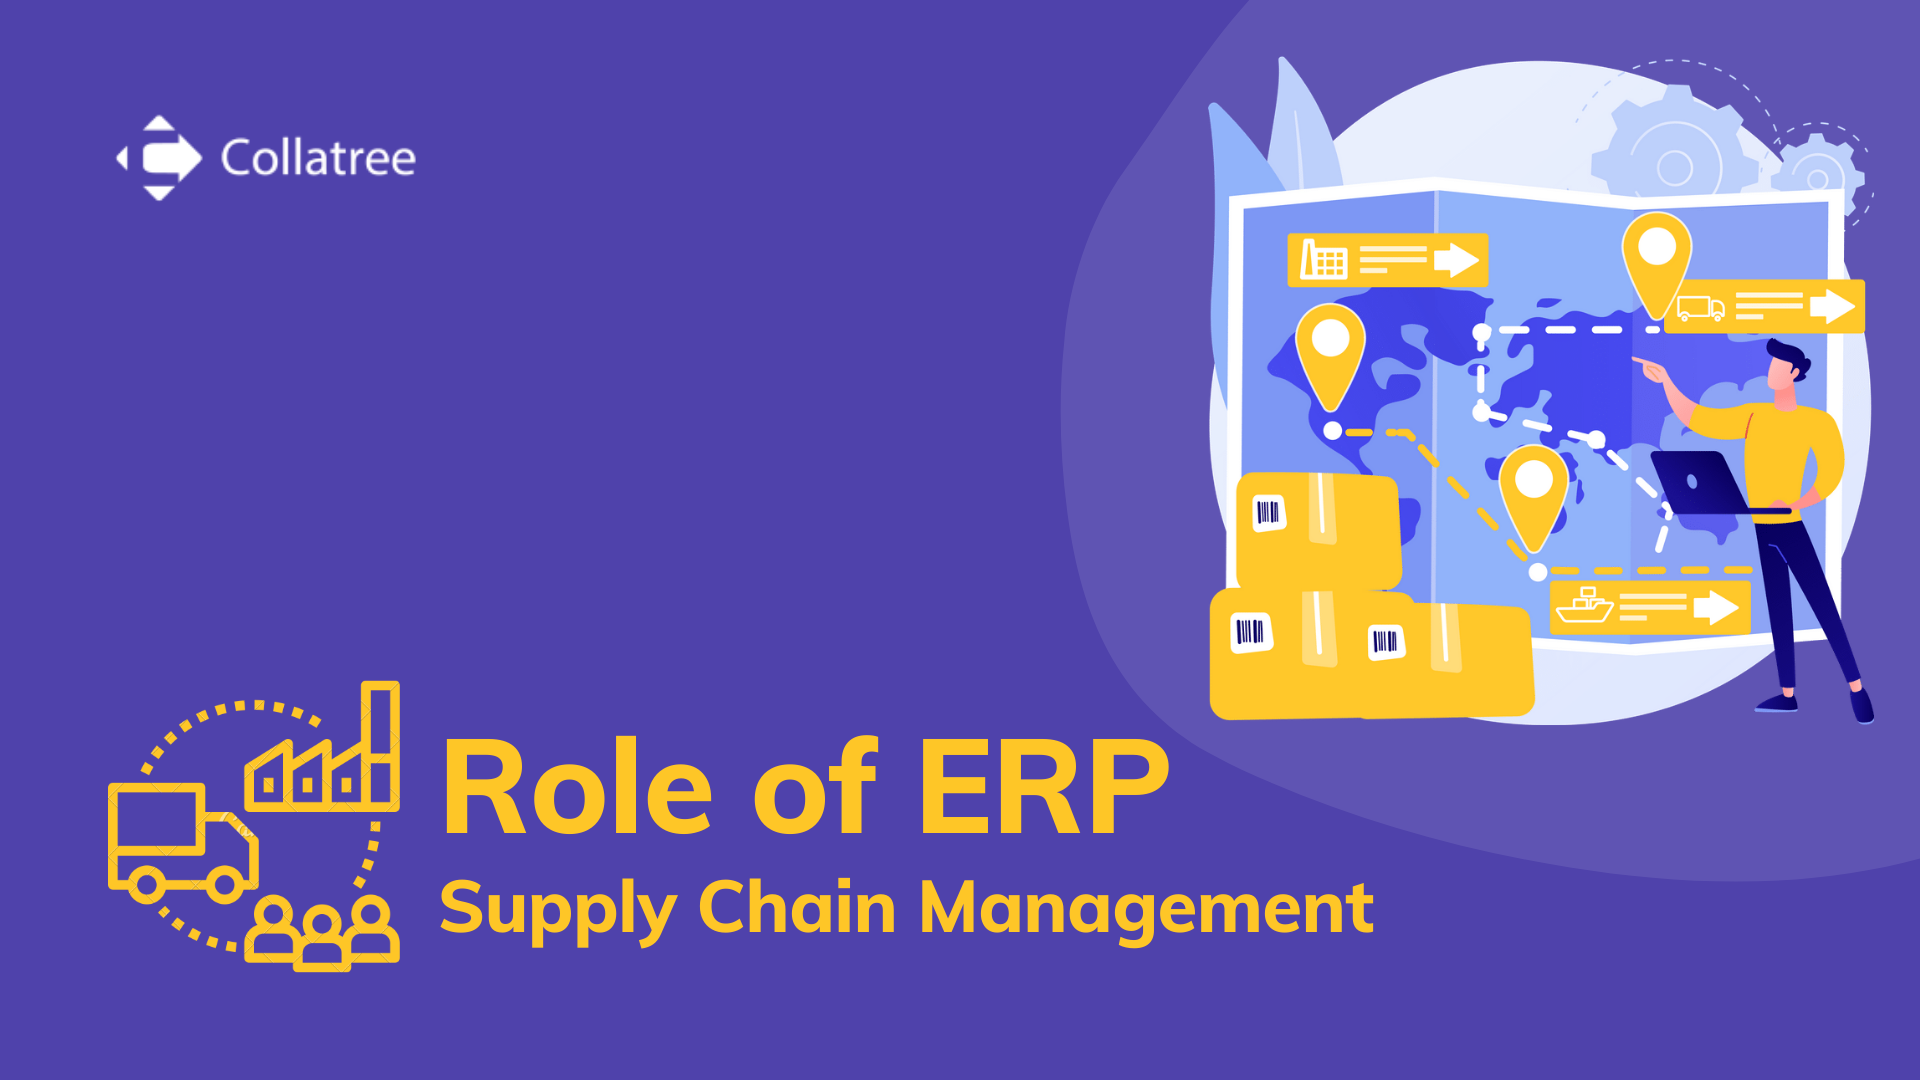 Role Of Enterprise Resource Planning Systems (ERP) In Supply Chain Management